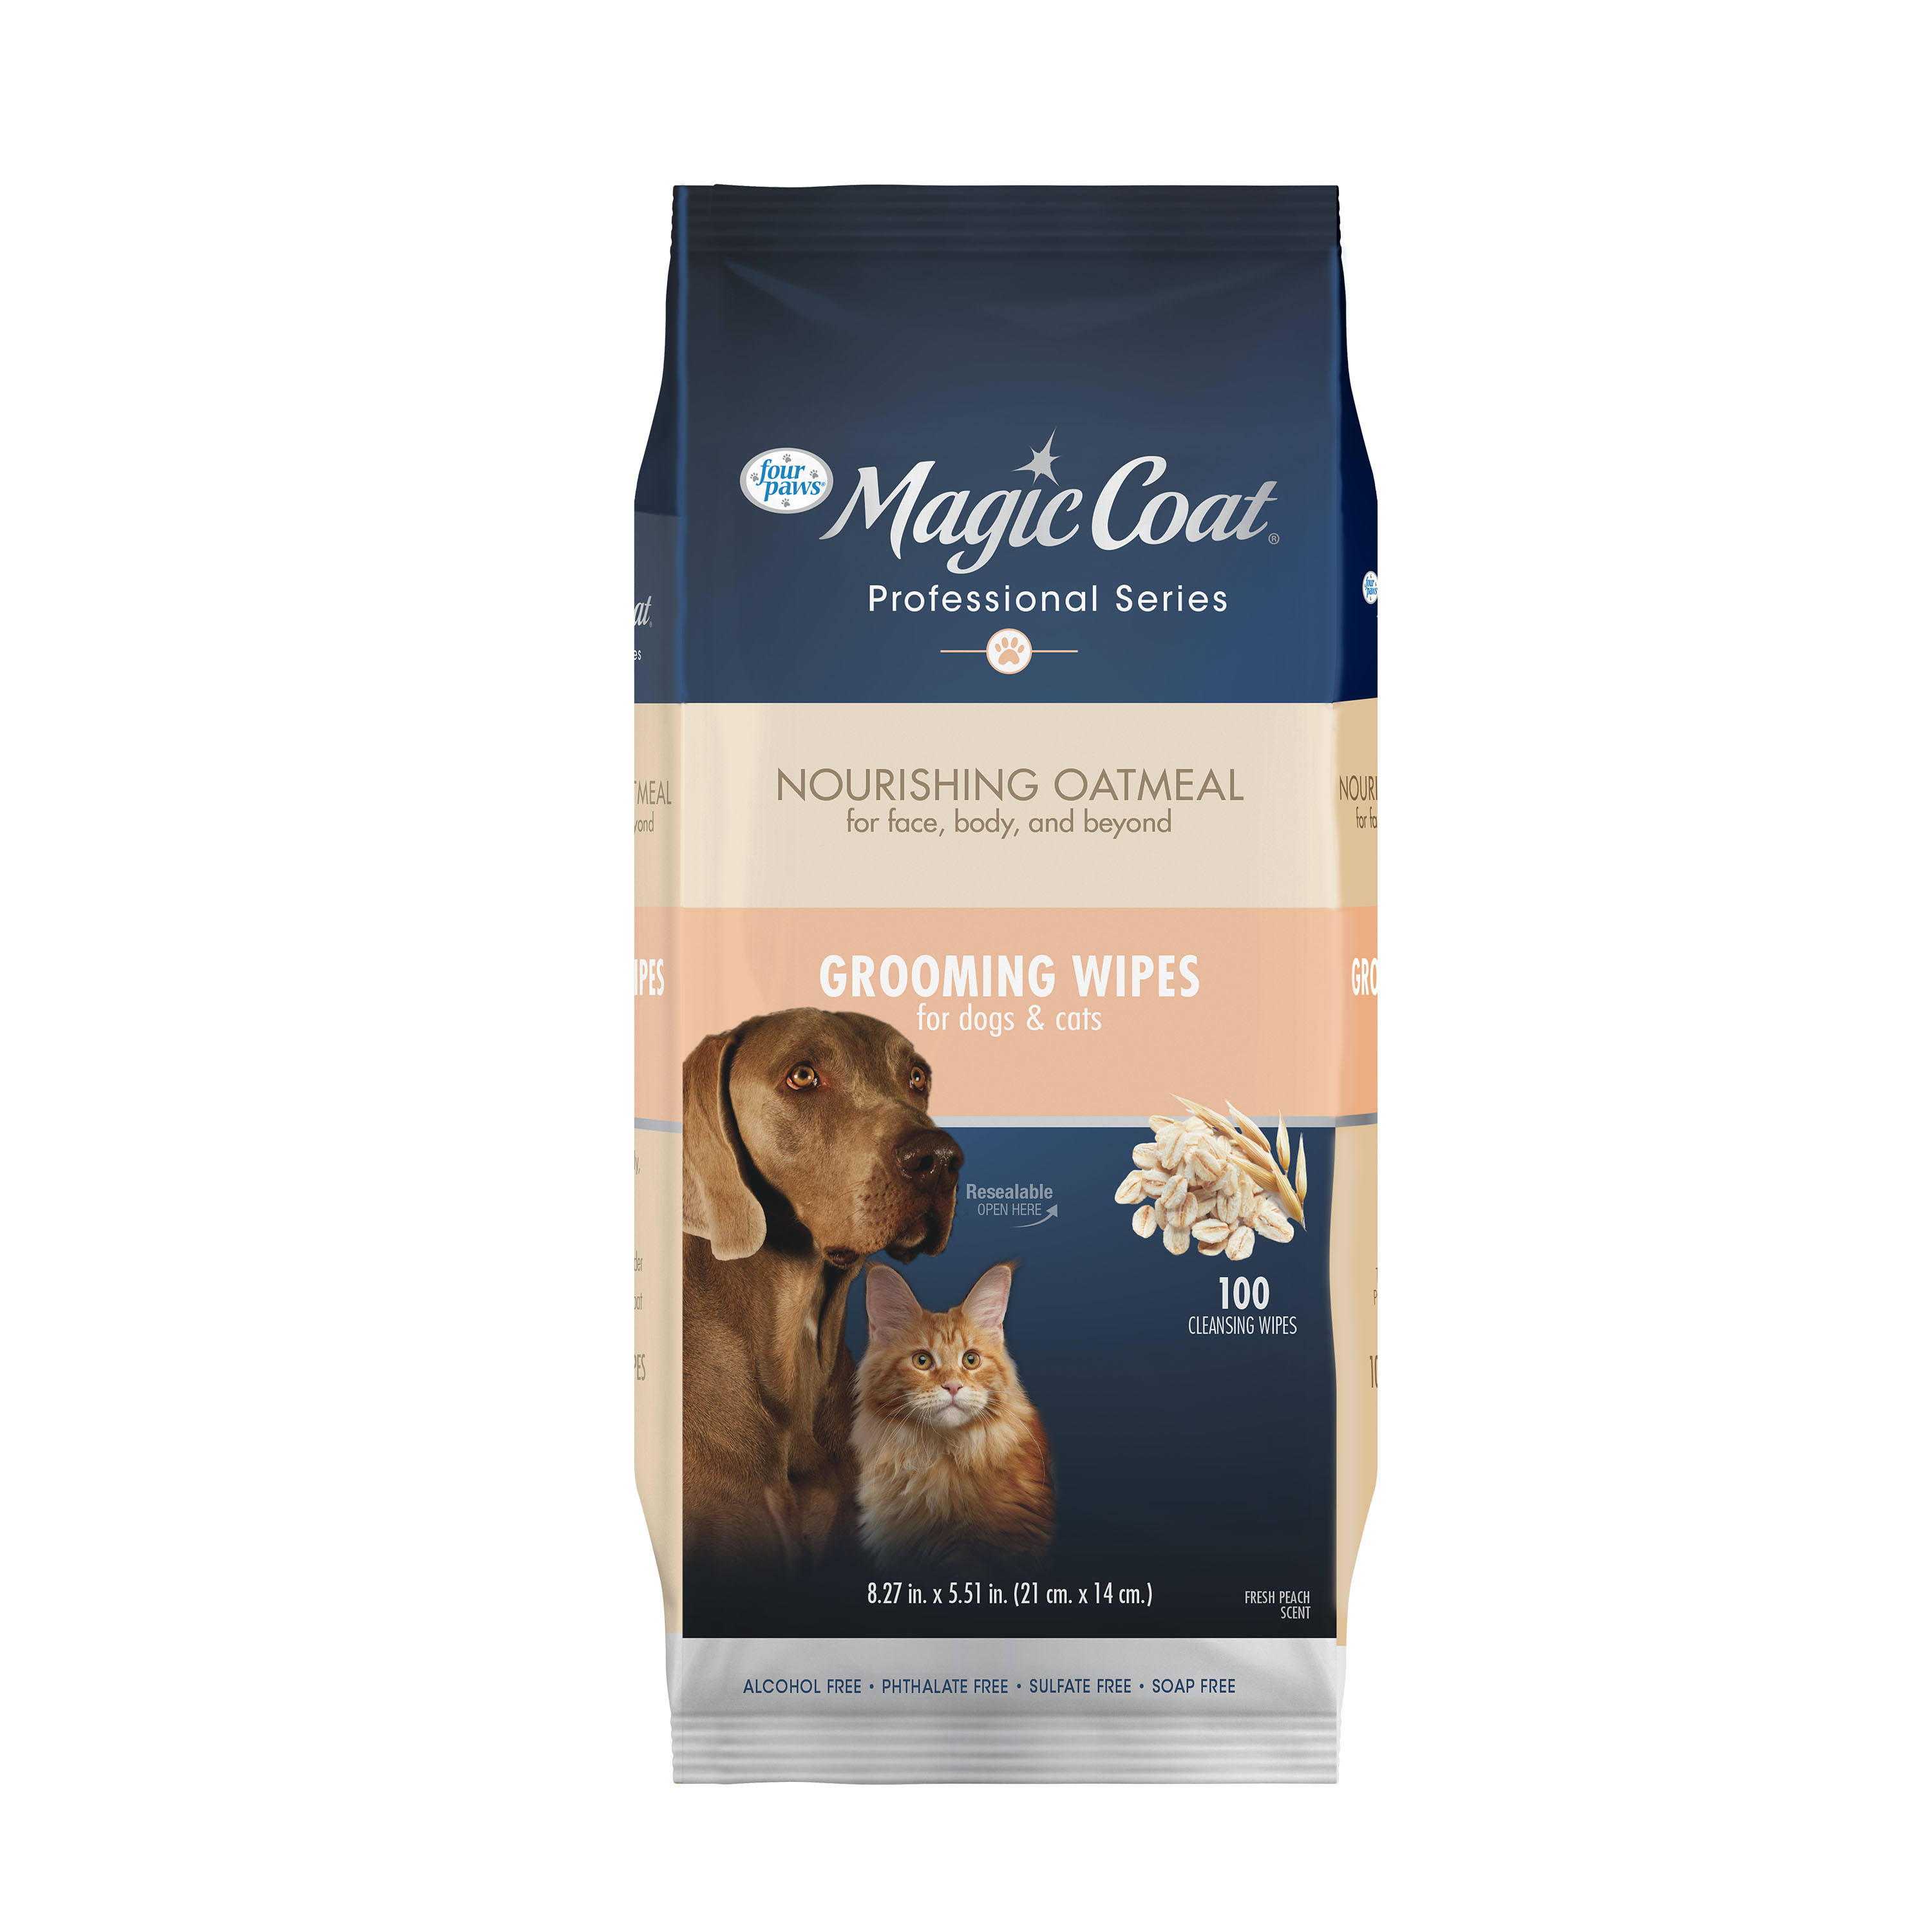 Magic Coat Professional Series Nourishing Oatmeal Cat and Dog Grooming Wipes front of package